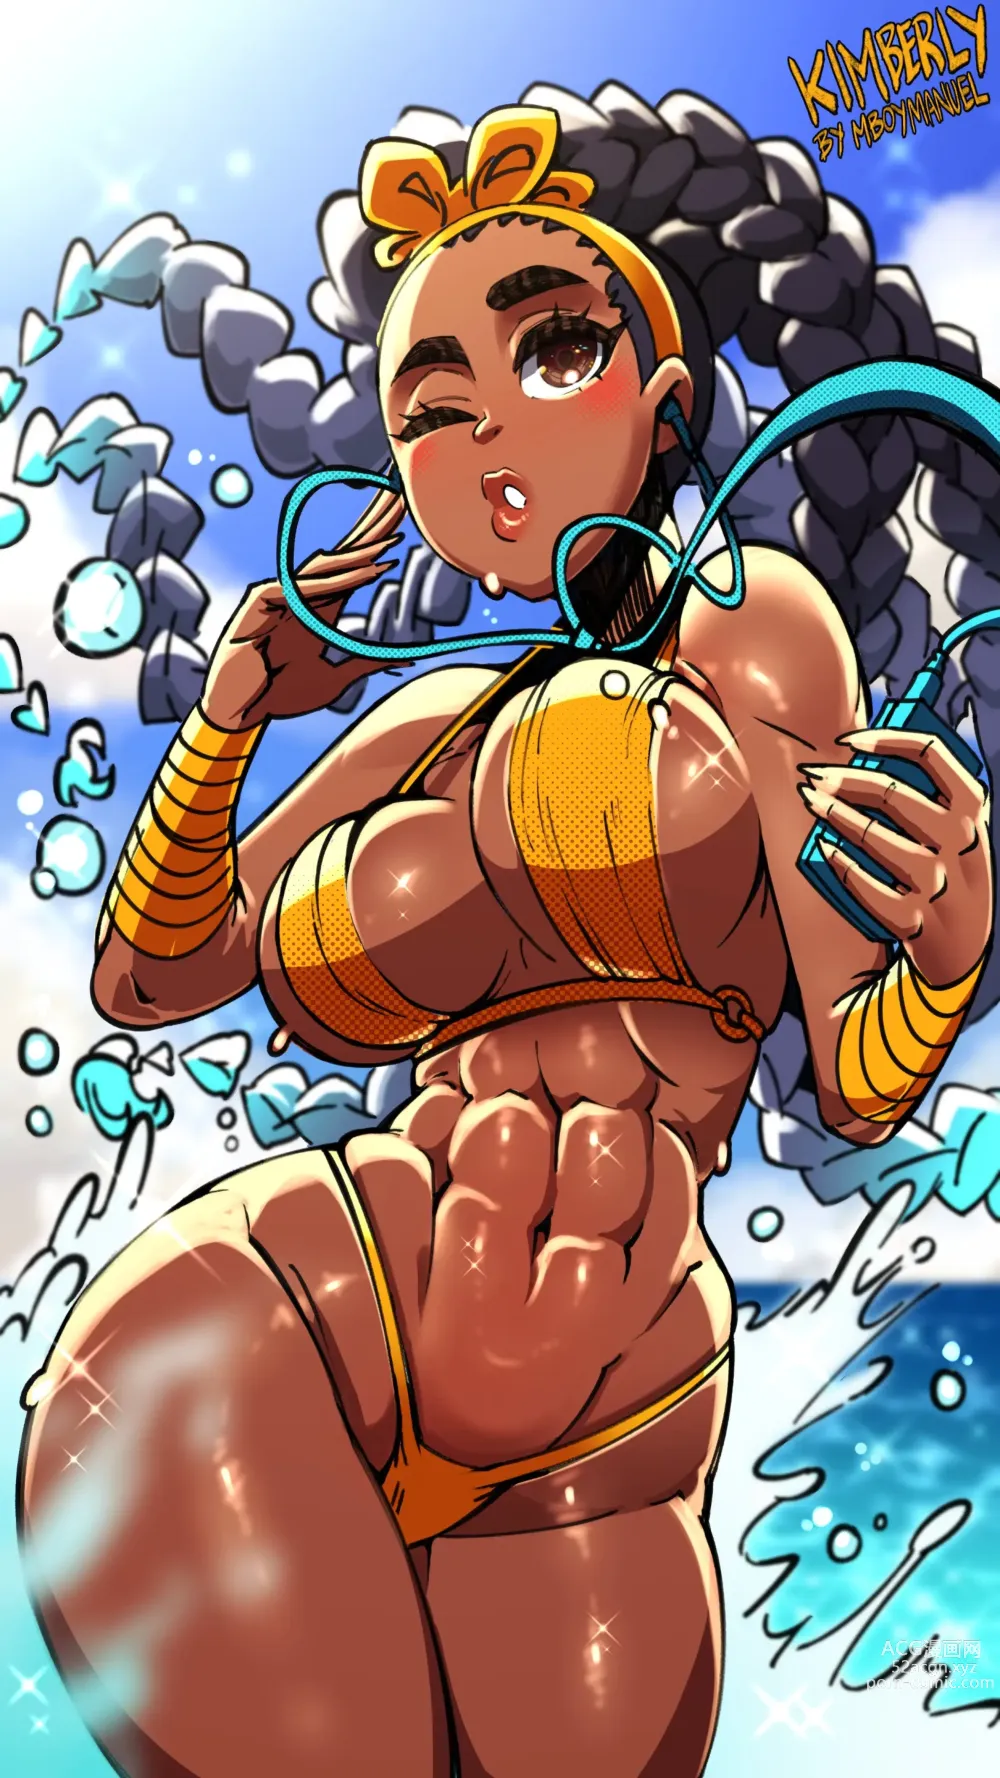 Page 1591 of imageset Street Fighter Collection